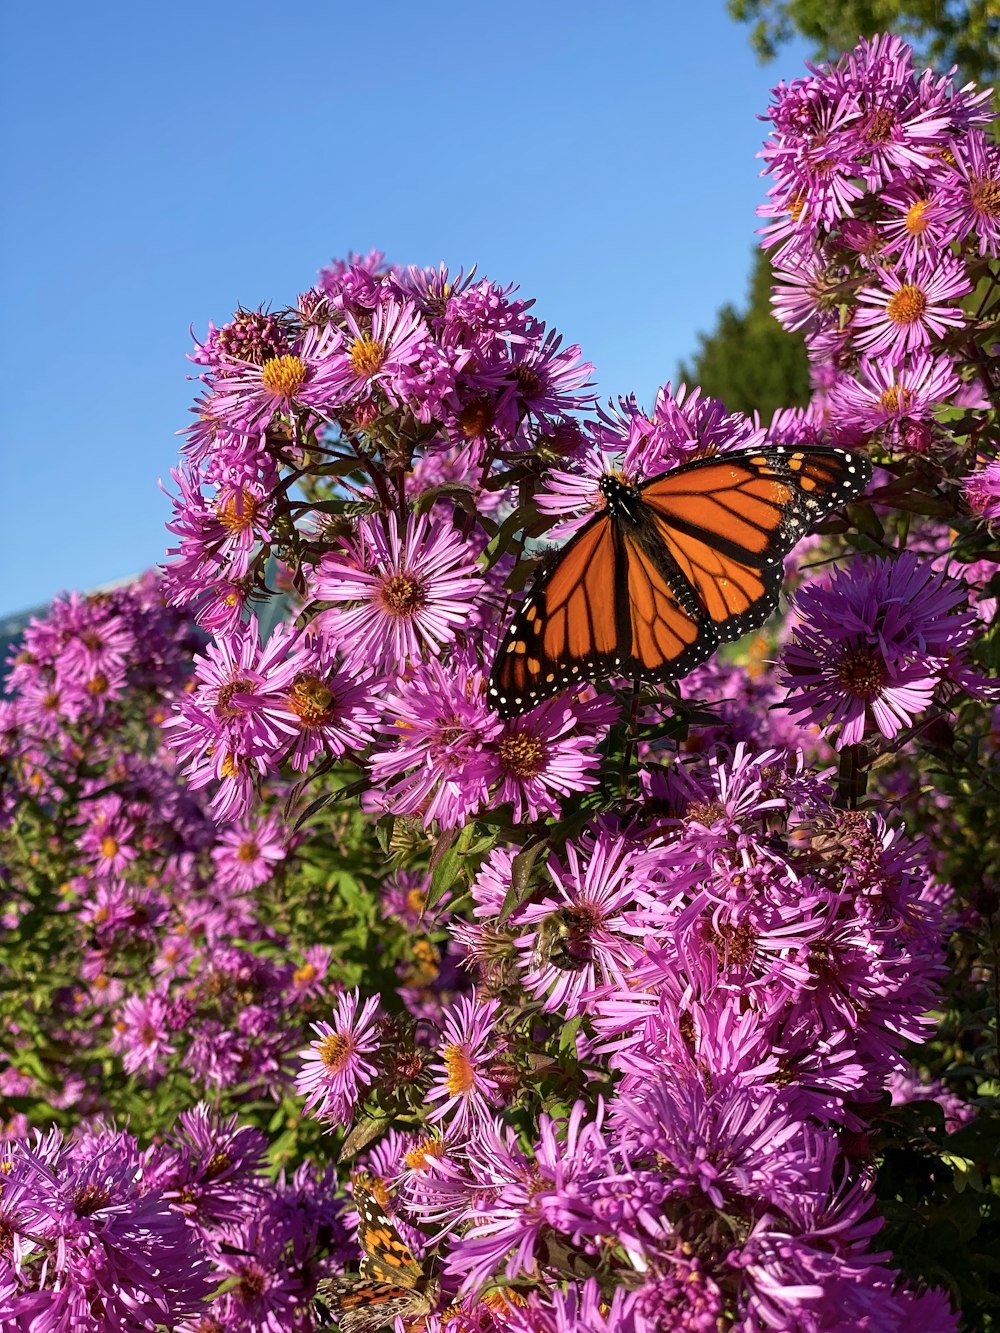 monarch butterfly perched on pink flower